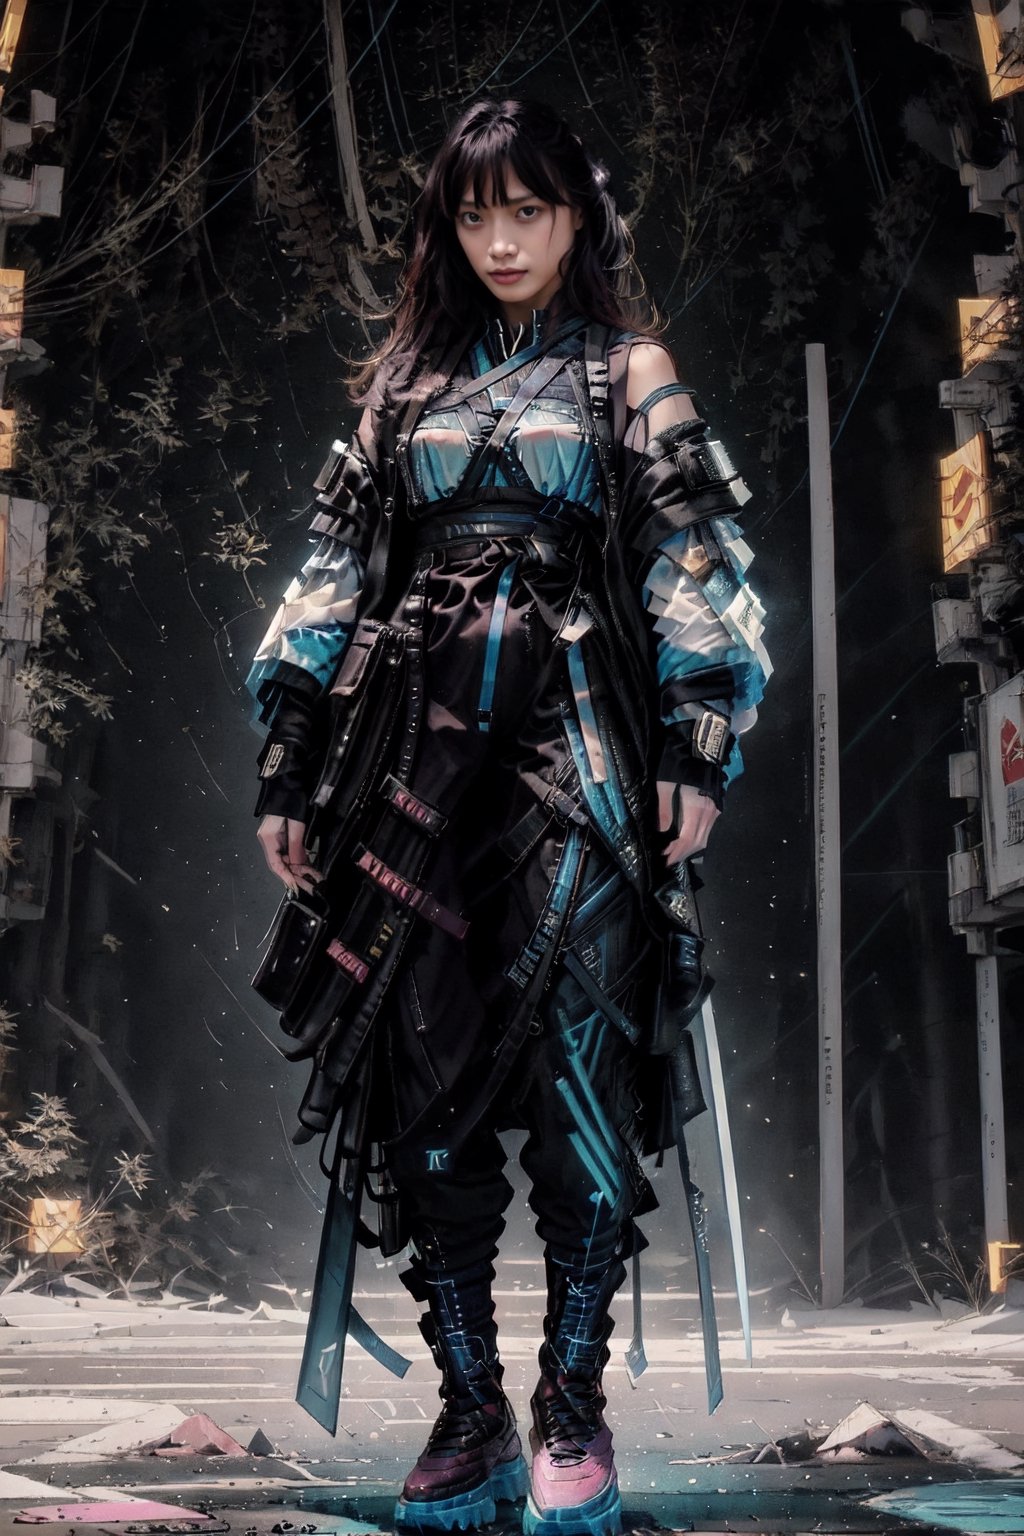 (best quality,8K,highres,masterpiece, ultra-detailed, super colorful, vibrant, realistic, high-resolution), wide view, full picture head-to-toe, colorful portrait of an asian woman with flawless anatomy, her left arm is a mechanical prosthetic. She is shirtless, no bra, but only wearing a blue-coloured clear see-through tactical kimono with no under-garment under it, large-breasted, slim-waisted, huge-hip, baggy cargo pants, doctor marten's high boots, Her tattoed skin is extremely detailed and realistic, with a natural and lifelike texture. Her pink-colored wavy hair is tied in samurai-style high-knot. The background is in the crowd in the middle of cyberpunk city, ((in a bright broad day light)), The lighting accentuates the contours of her face, adding depth and dimension to the portrait. The overall composition is masterfully done, showcasing the intricate details and achieving a high level of realism, techwear, kimono,photorealistic,1girl lacus clyne pink hair blue eyes,DonM3l3m3nt4l,firefliesfireflies,IncrsNikkeProfile,Extremely Realistic,dream_girl,Samurai girl,Pixel art,tech